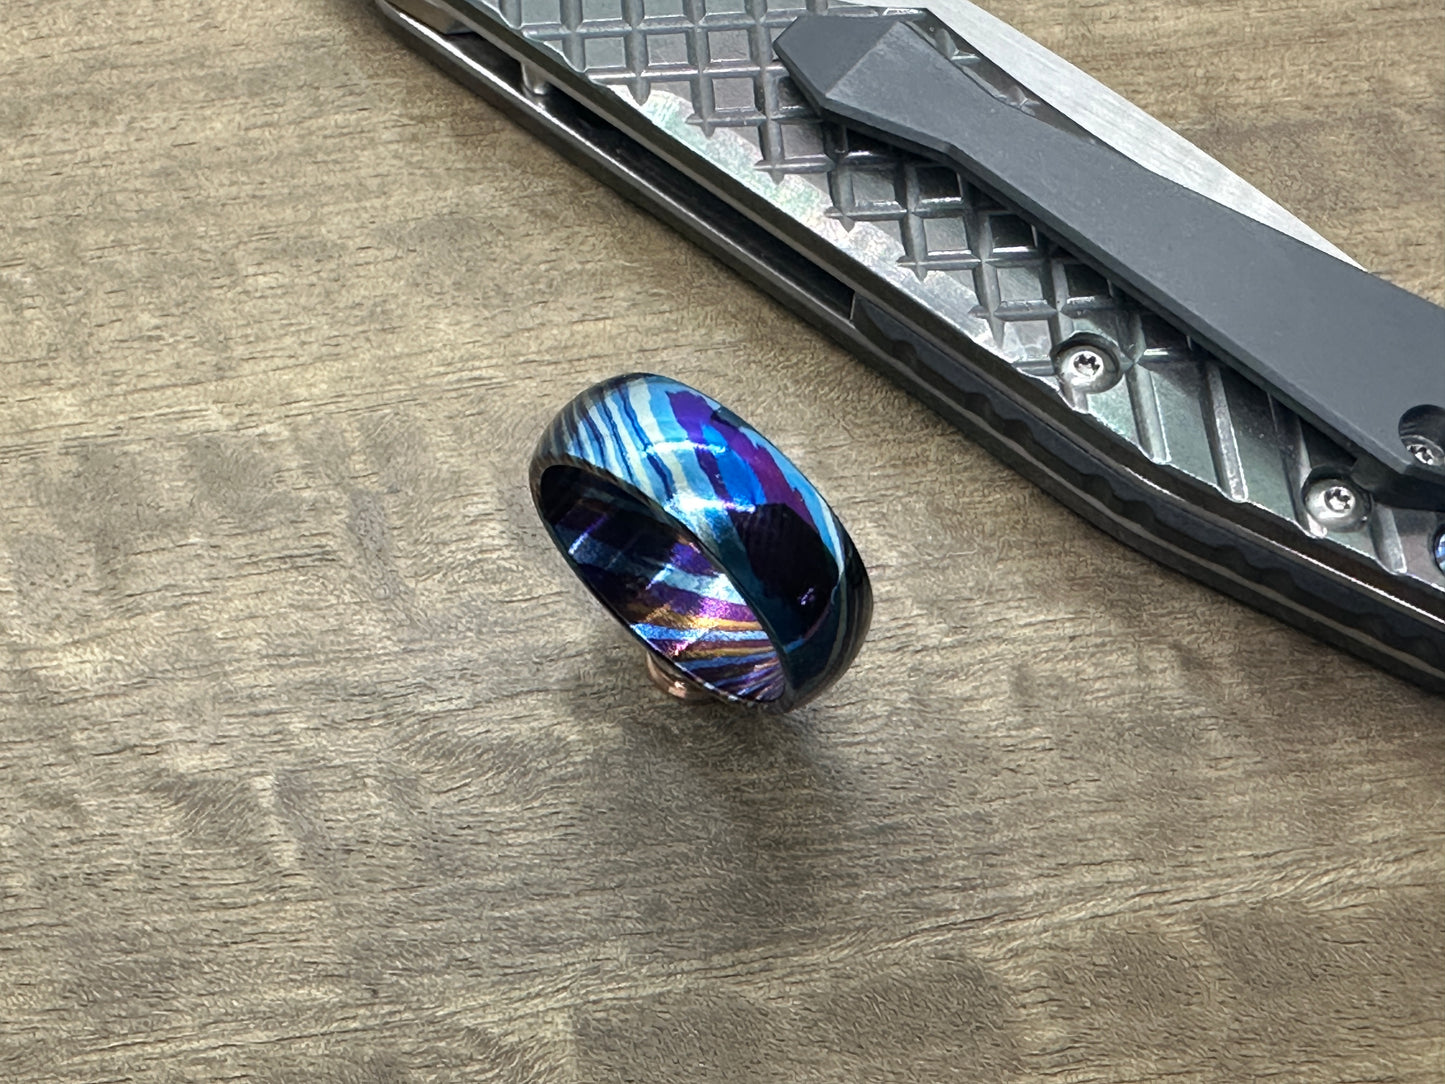 COMFORT TIMASCUS Ring US size 8-12 / Pendant / Keychain / Stand